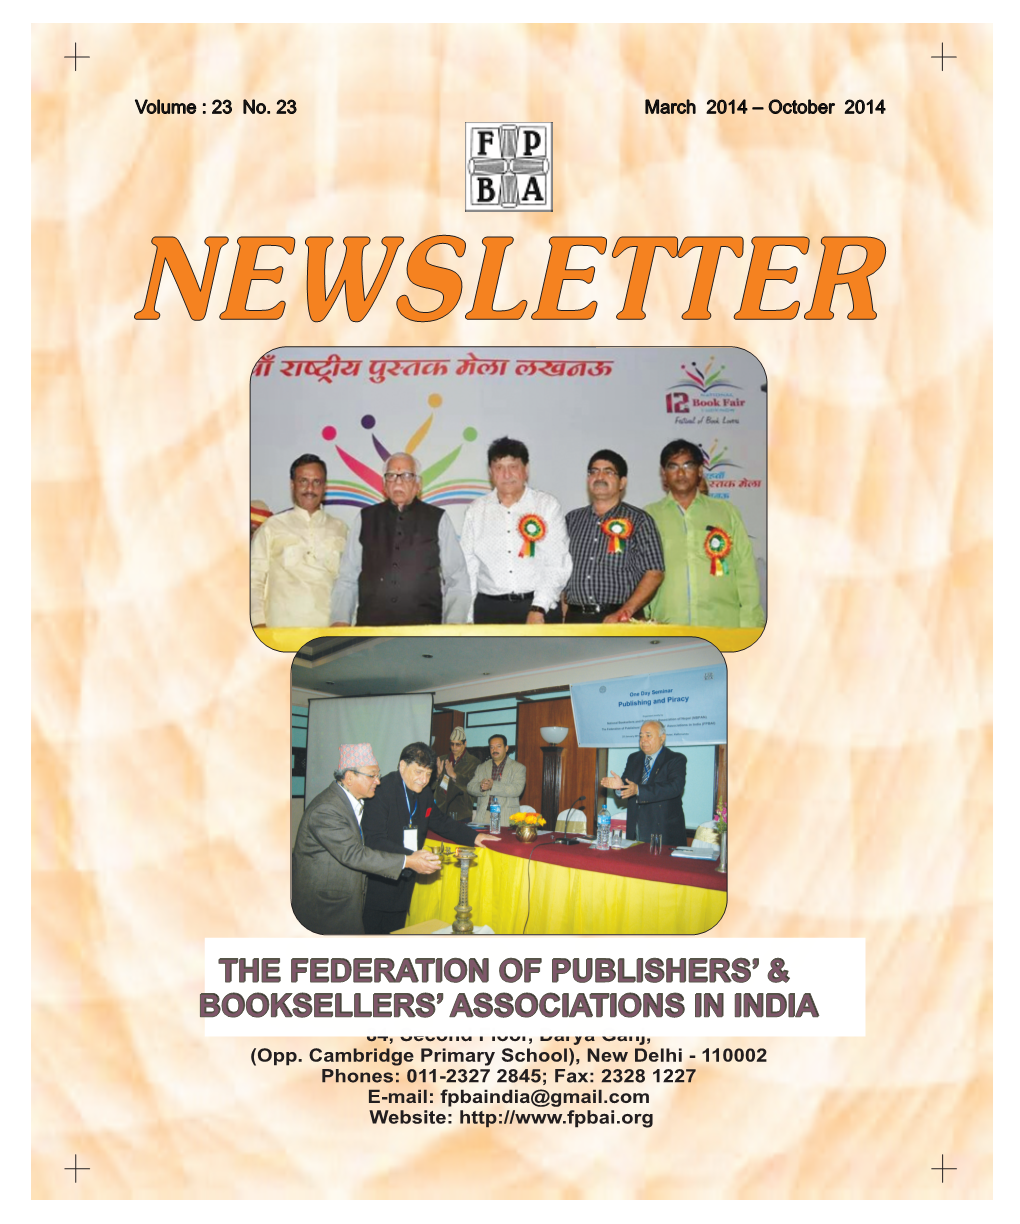 The Federation of Publishers' & Booksellers' Associations In